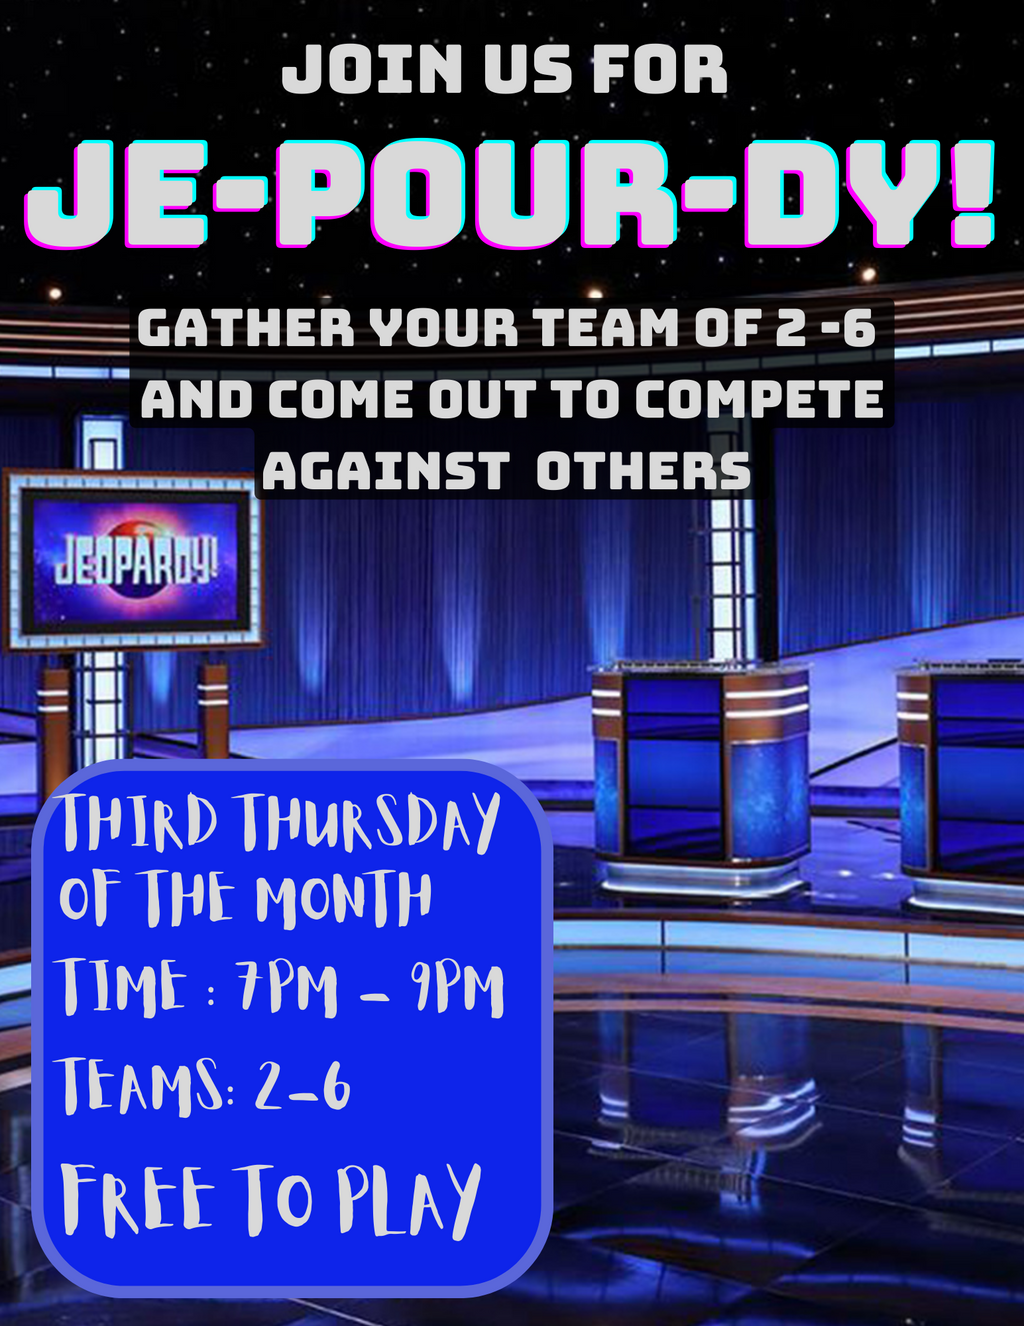 JE-POUR-DY, Thursday May 16th